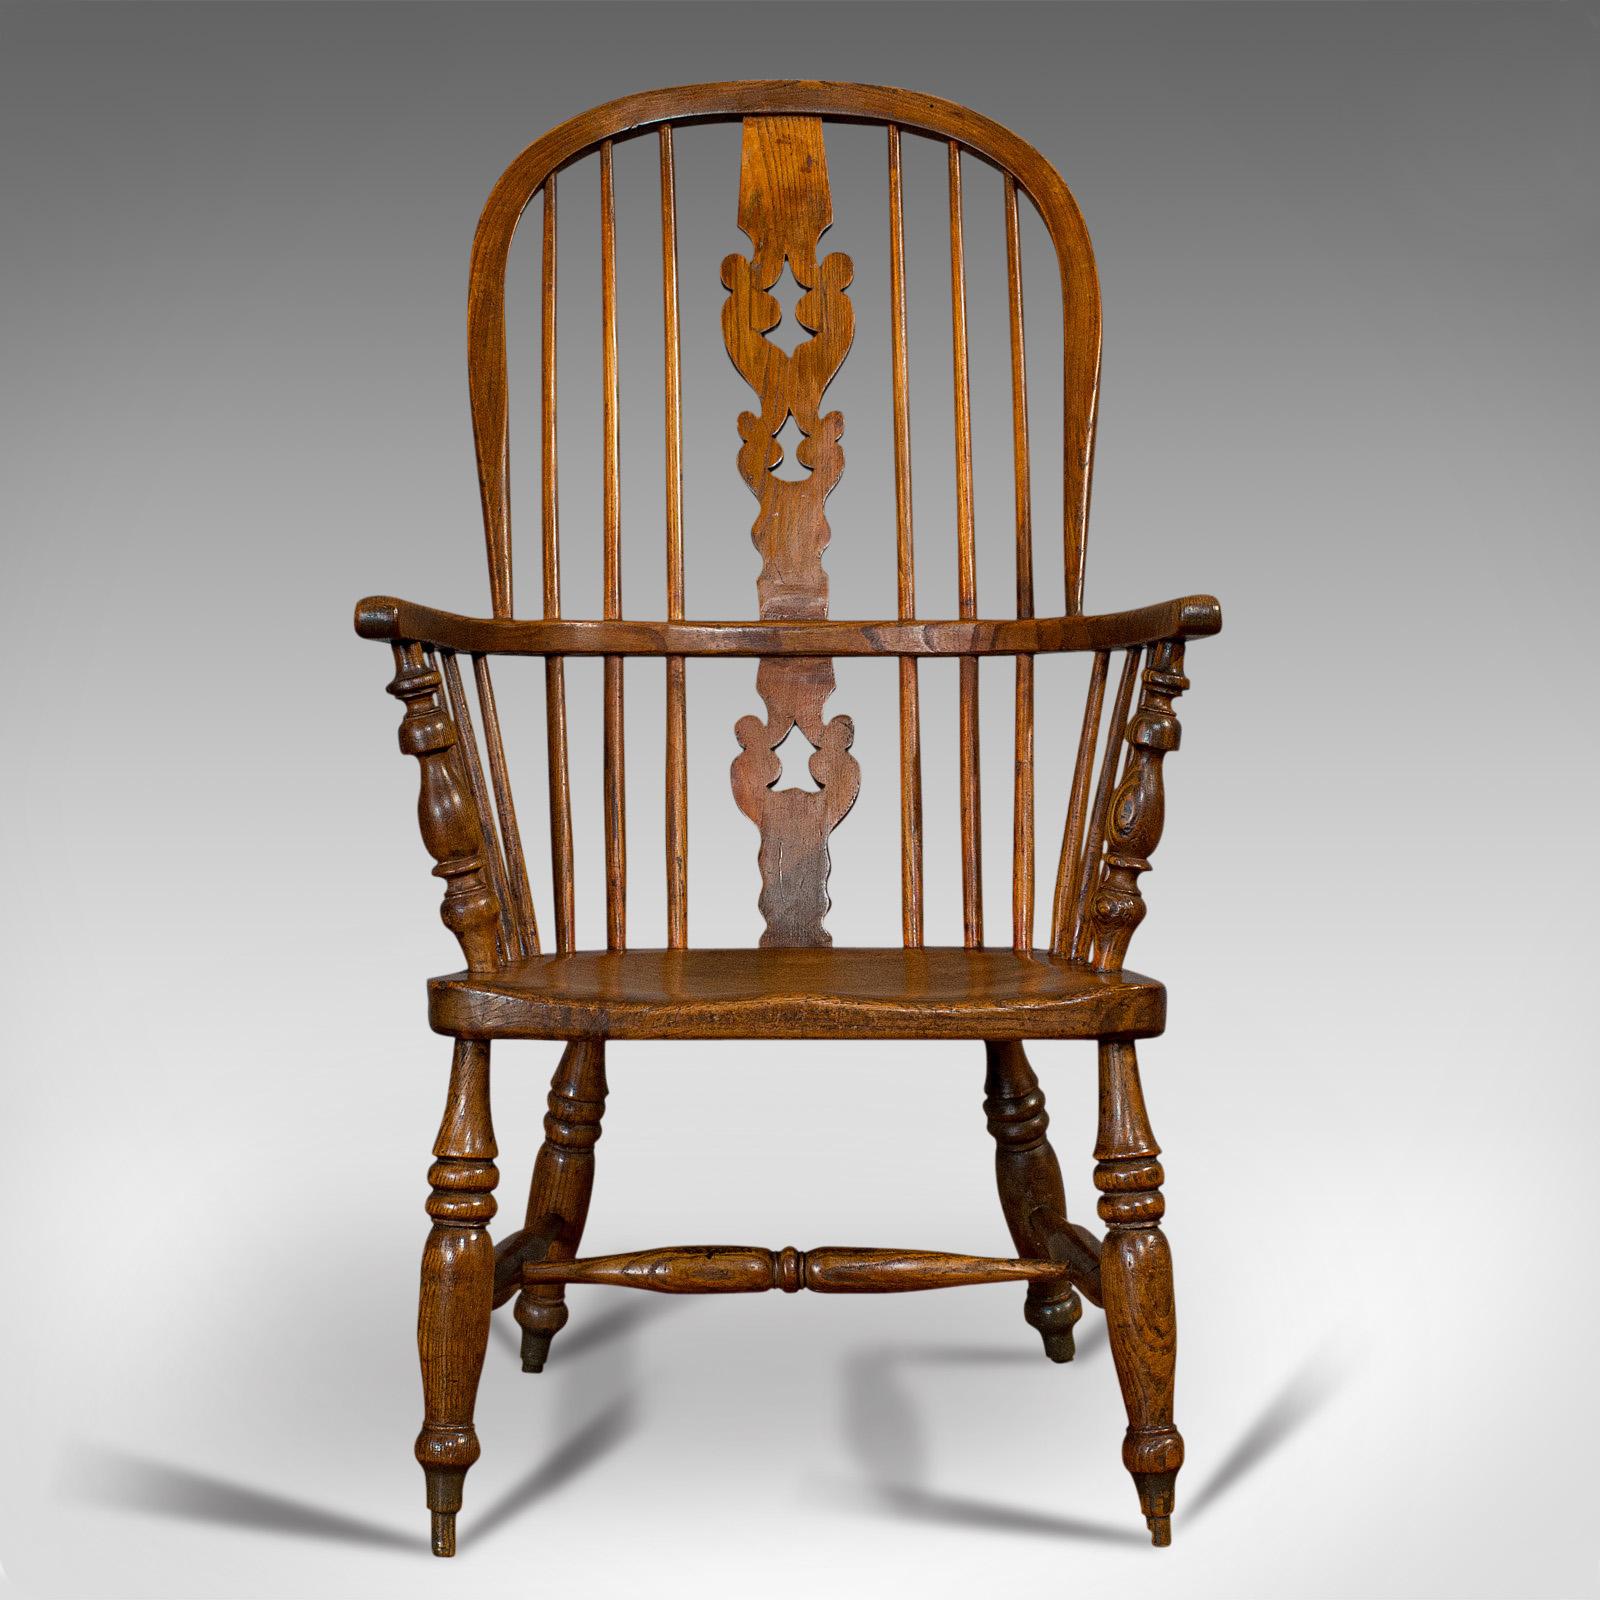 This is an antique Windsor chair. A British, elm and ash elbow or armchair, dating to the mid-Victorian period, circa 1860.

Country house appeal
Displays a desirable aged patina
Elm and ash show fine grain interest
Appealing in color with rich